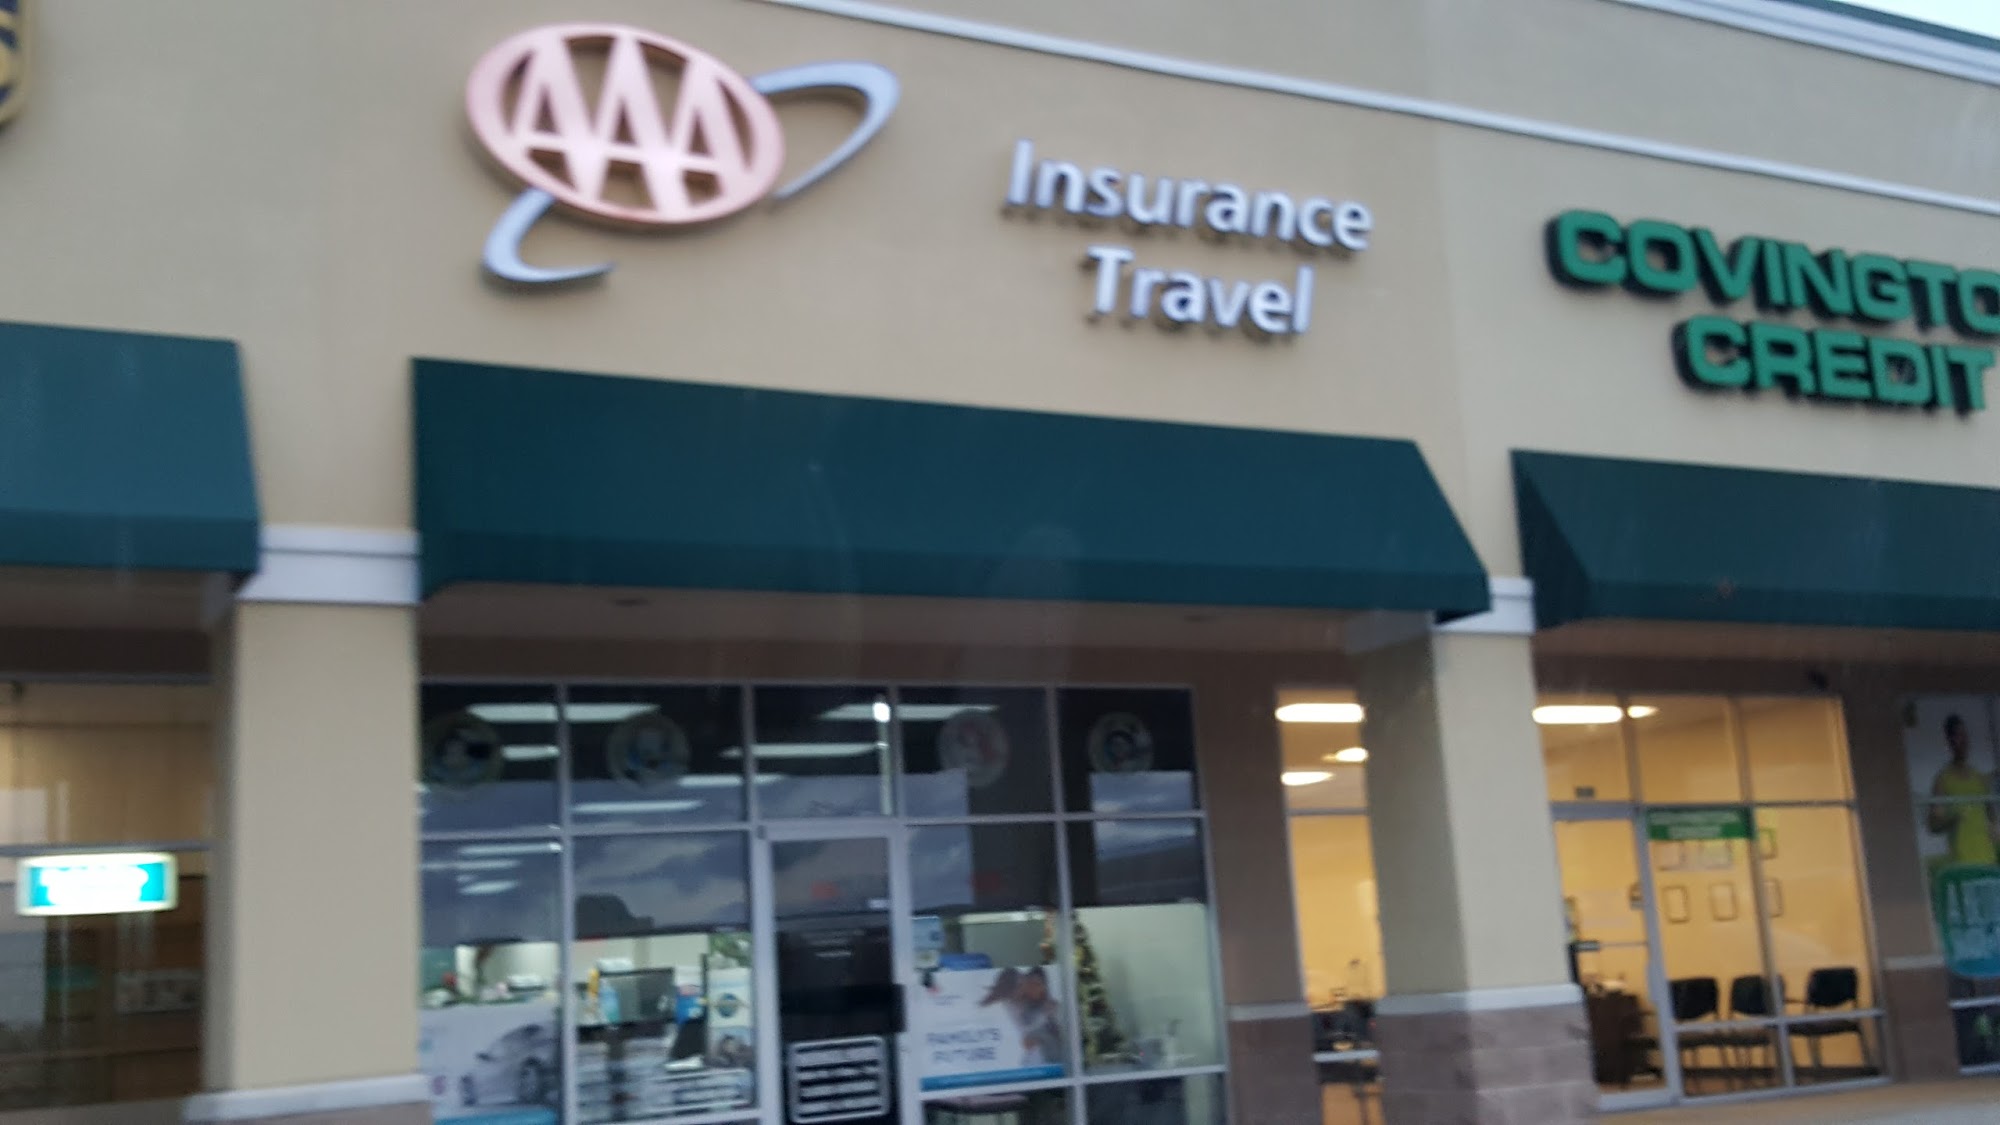 AAA Decatur Insurance and Member Services